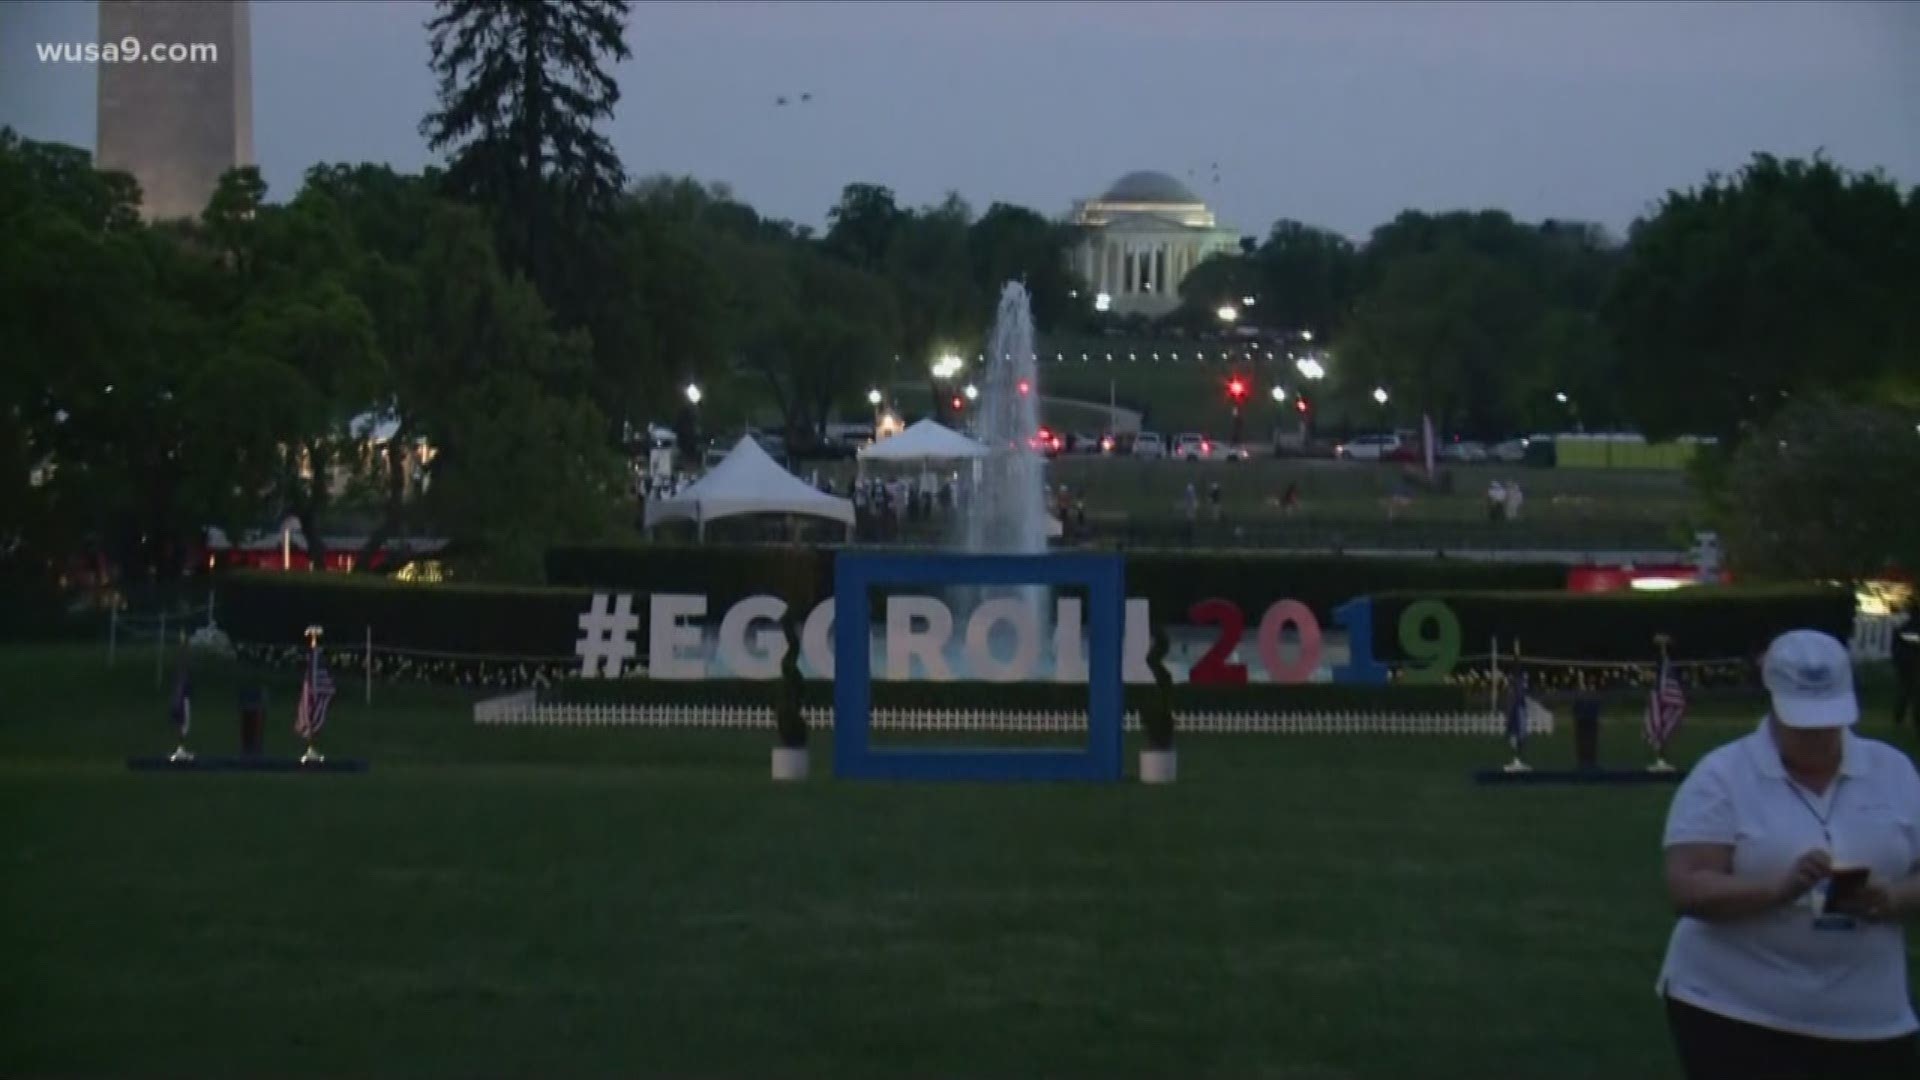 Thirty thousand people are expected to attend the White House Easter Egg Roll on the South Lawn.